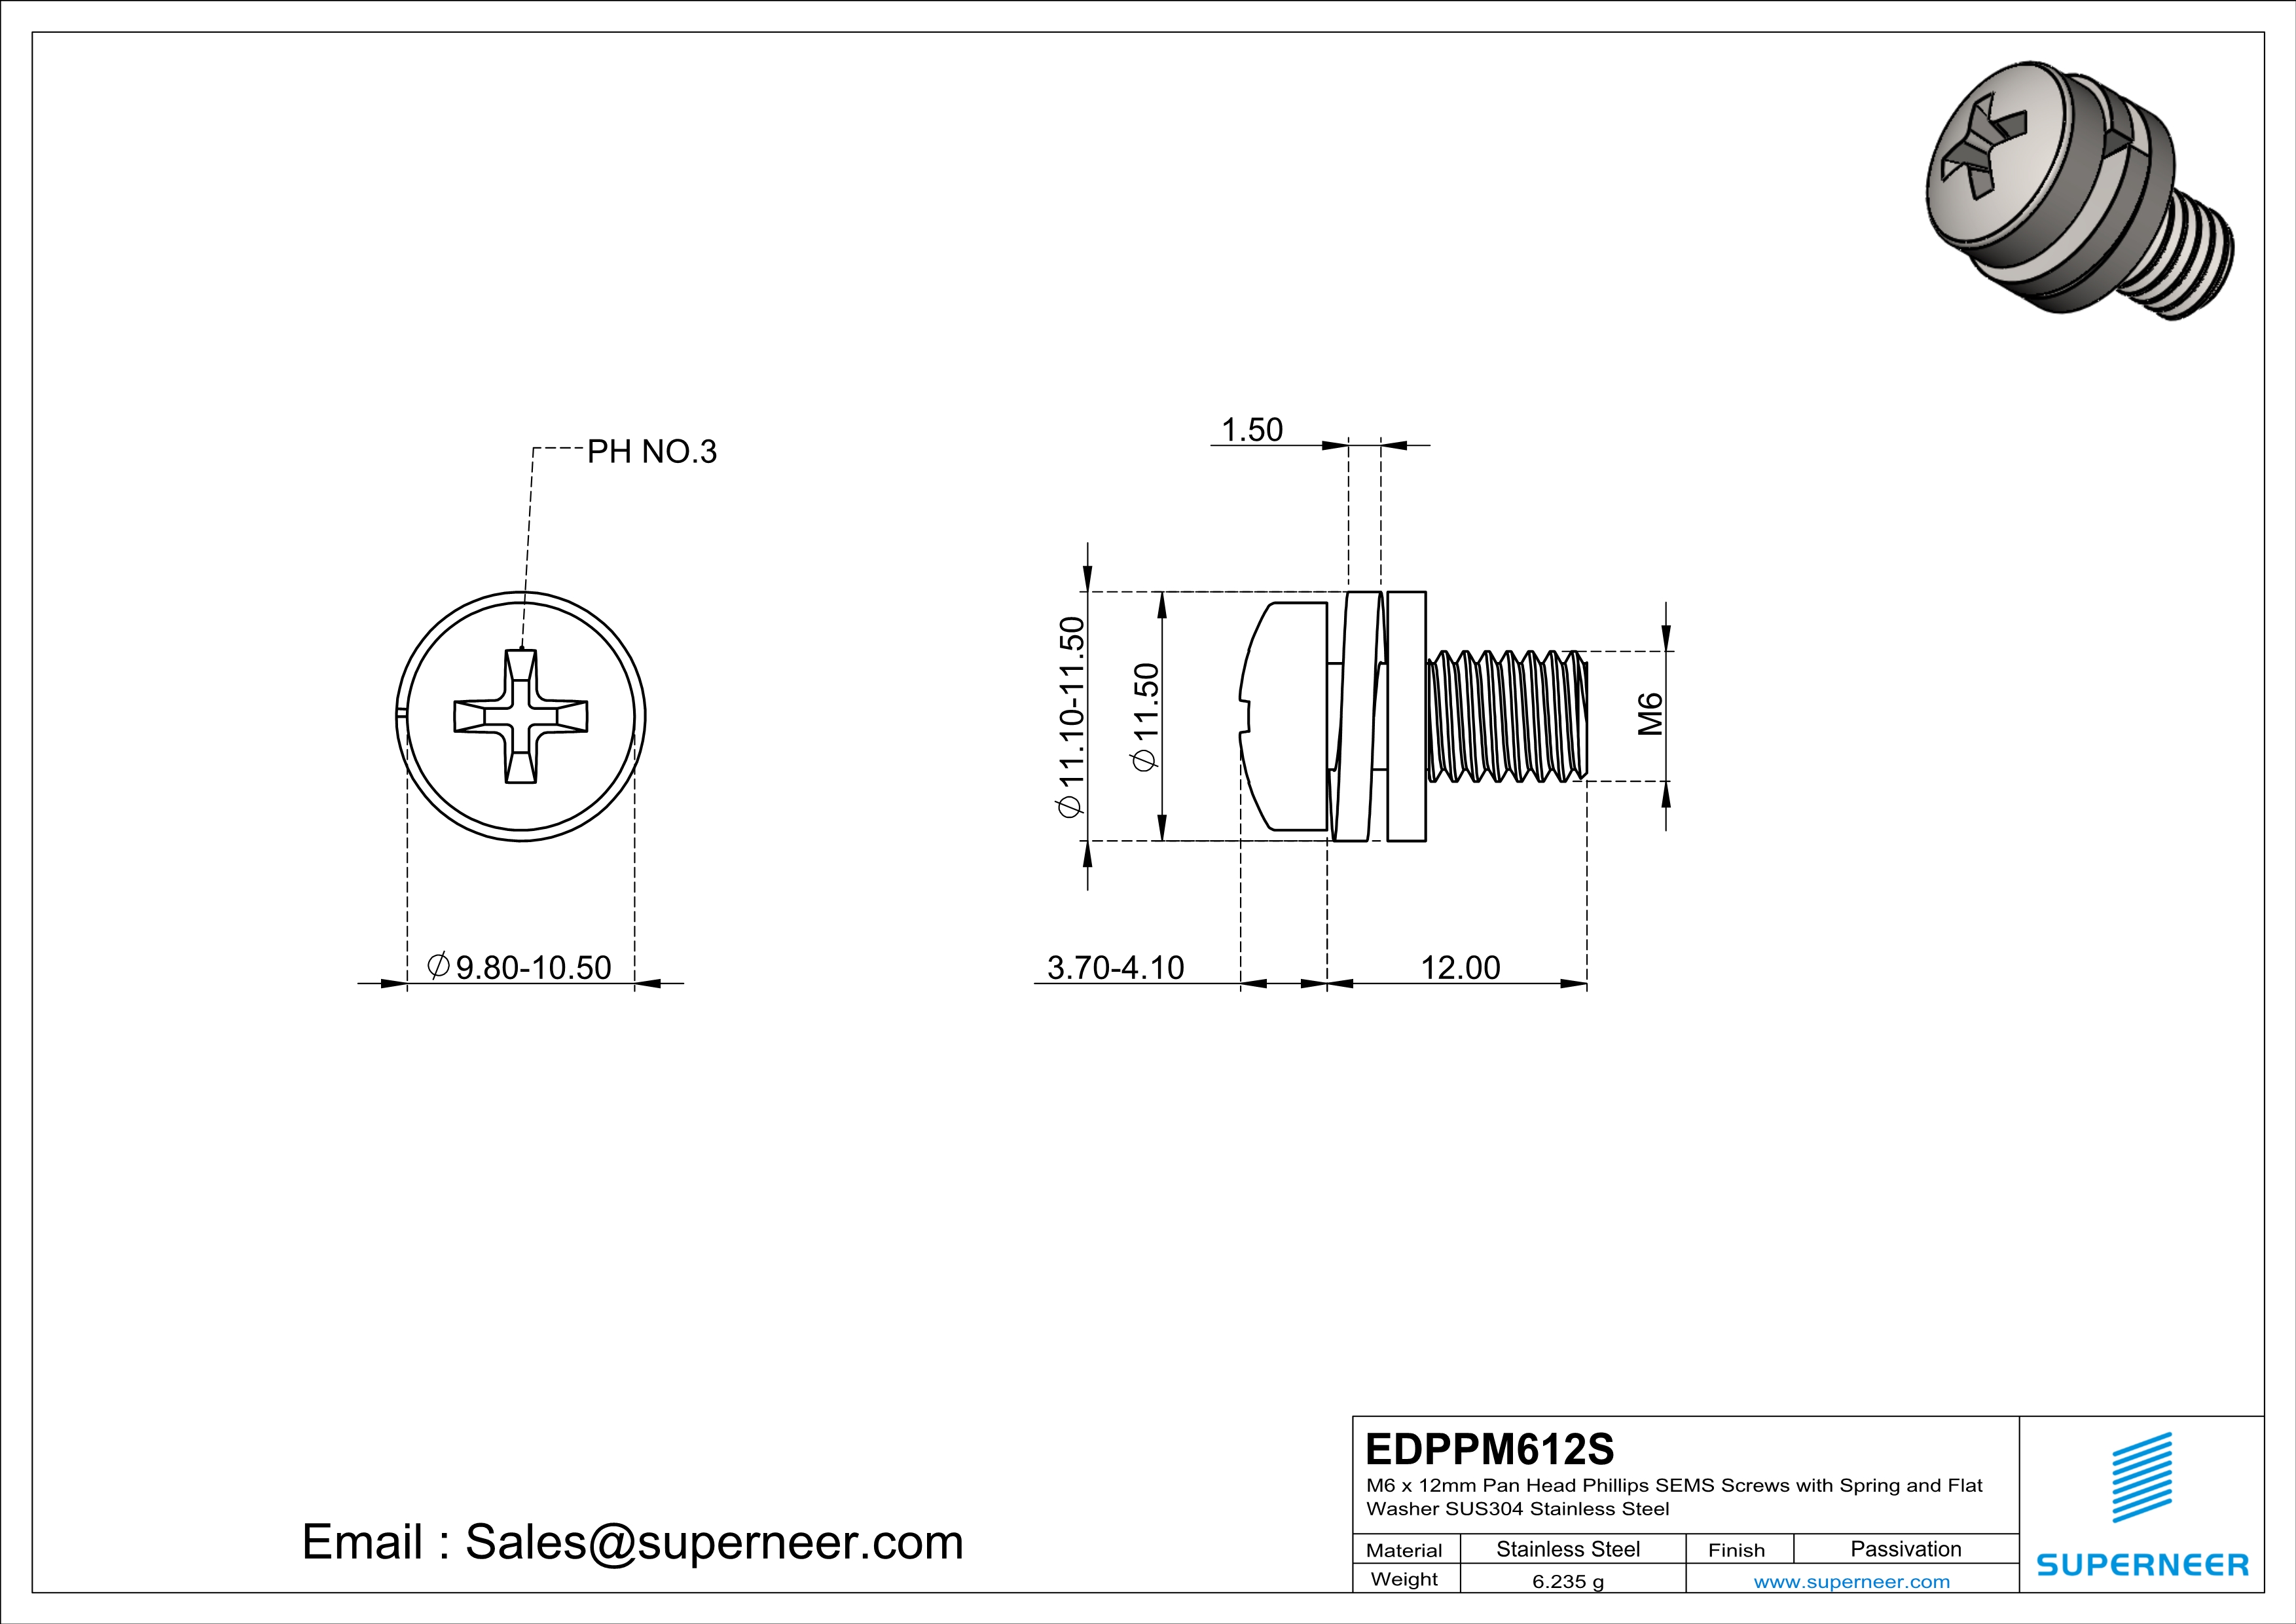 M6 x 12mm Pan Head Phillips SEMS Screws with Spring and Flat Washer SUS304 Stainless Steel Inox